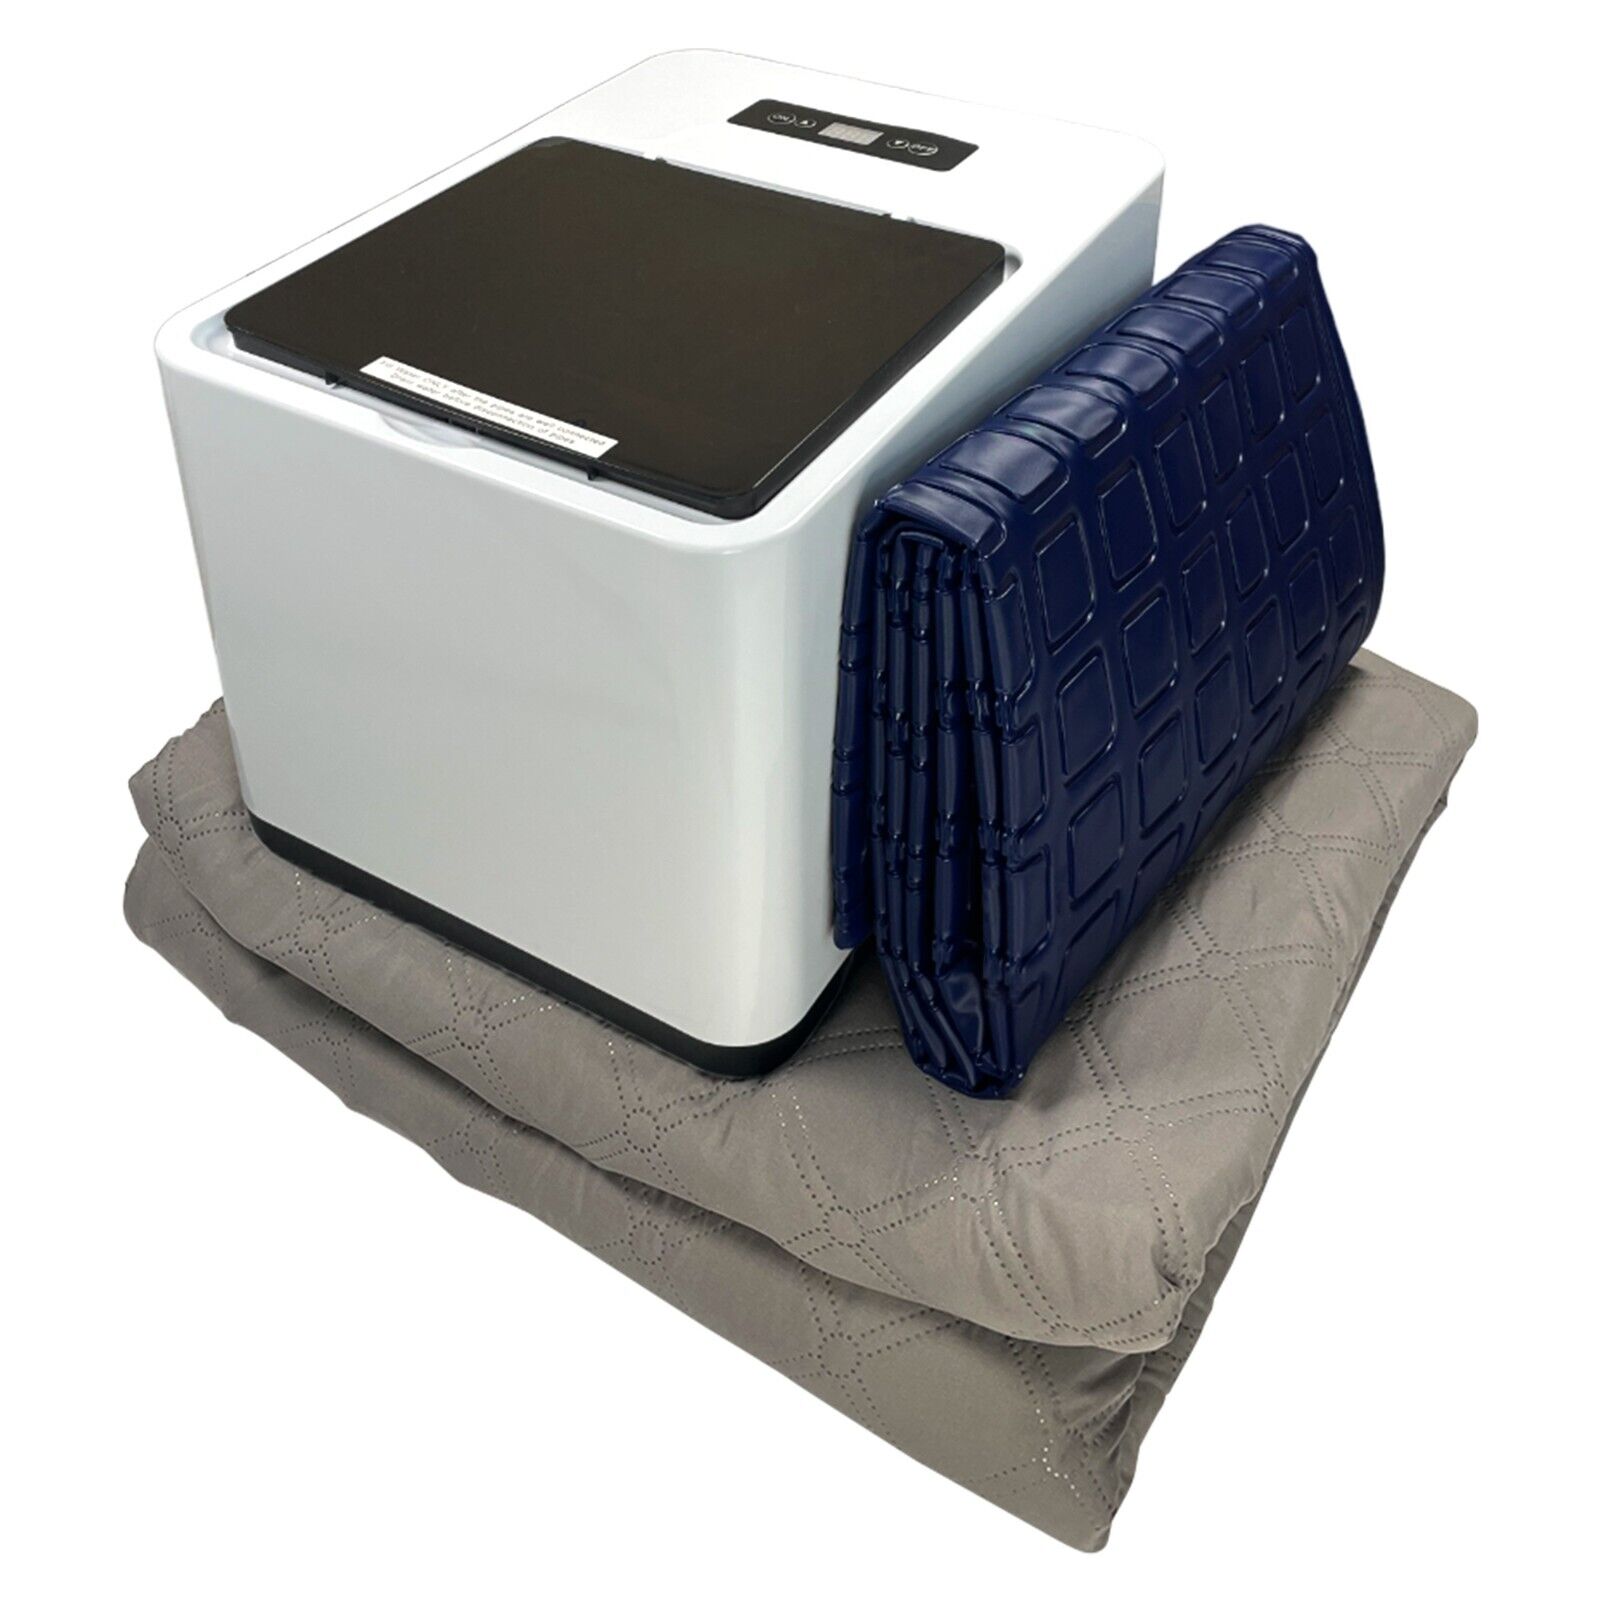 Cold Flash Sleep Cooling System. Compressor Chilled Cooling Pad